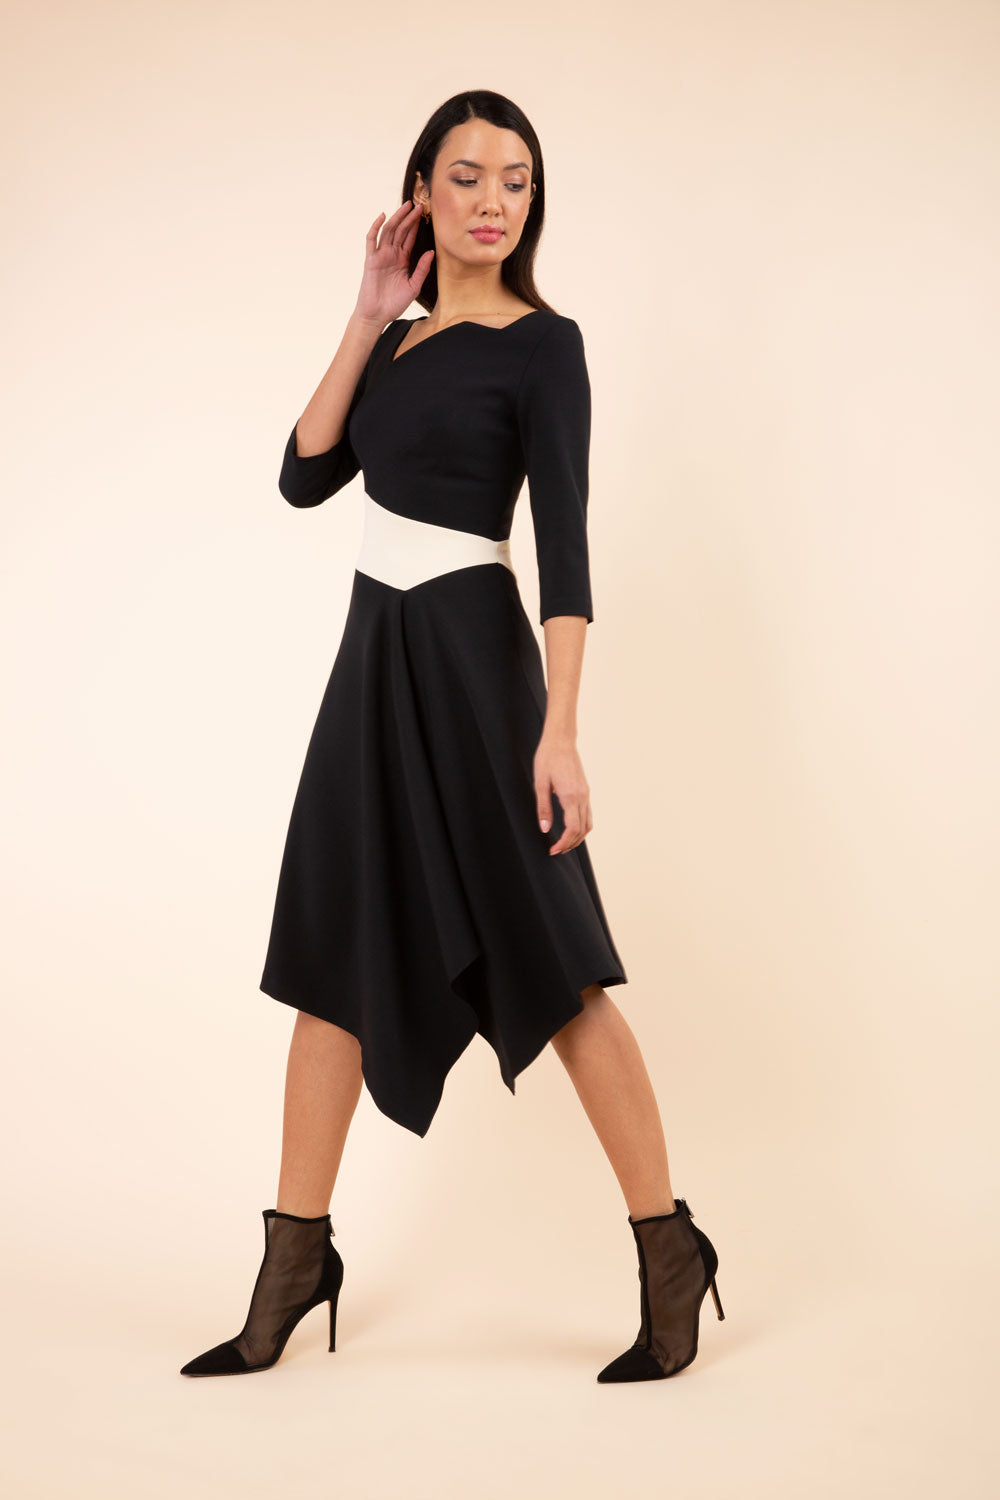 Model wearing Diva Catwalk Pinto Contrast swing a-line skirt Dress with asymmetric skirt and asymmetric neckline with three quarter sleeve in black and beige